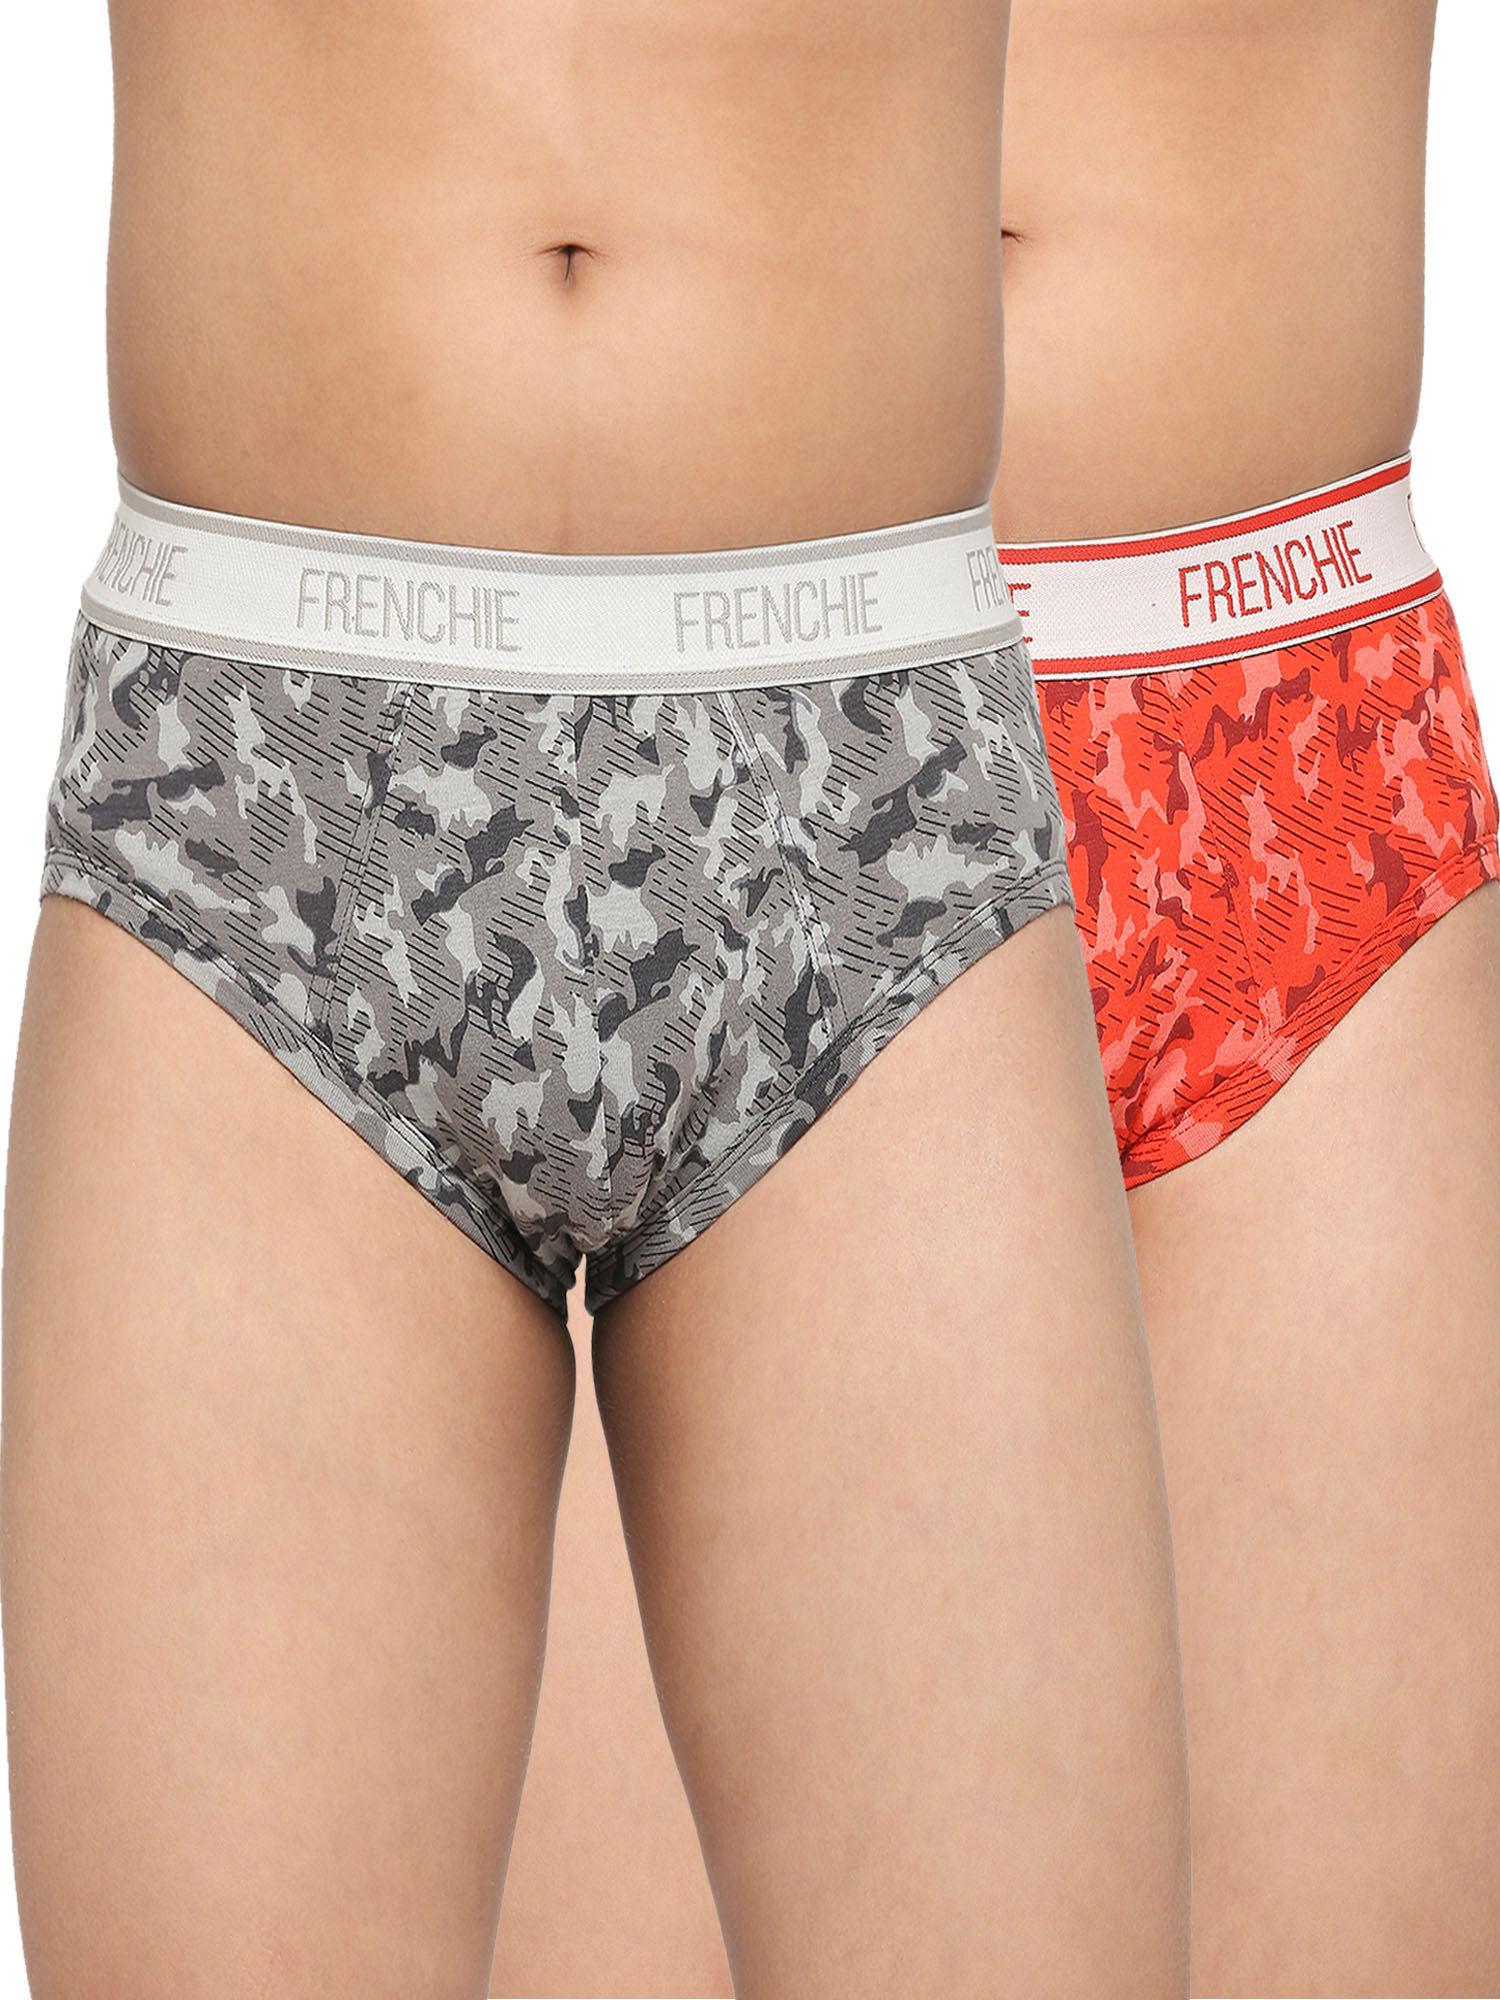 teenagers-cotton-brief-red-and-grey-(pack-of-2)